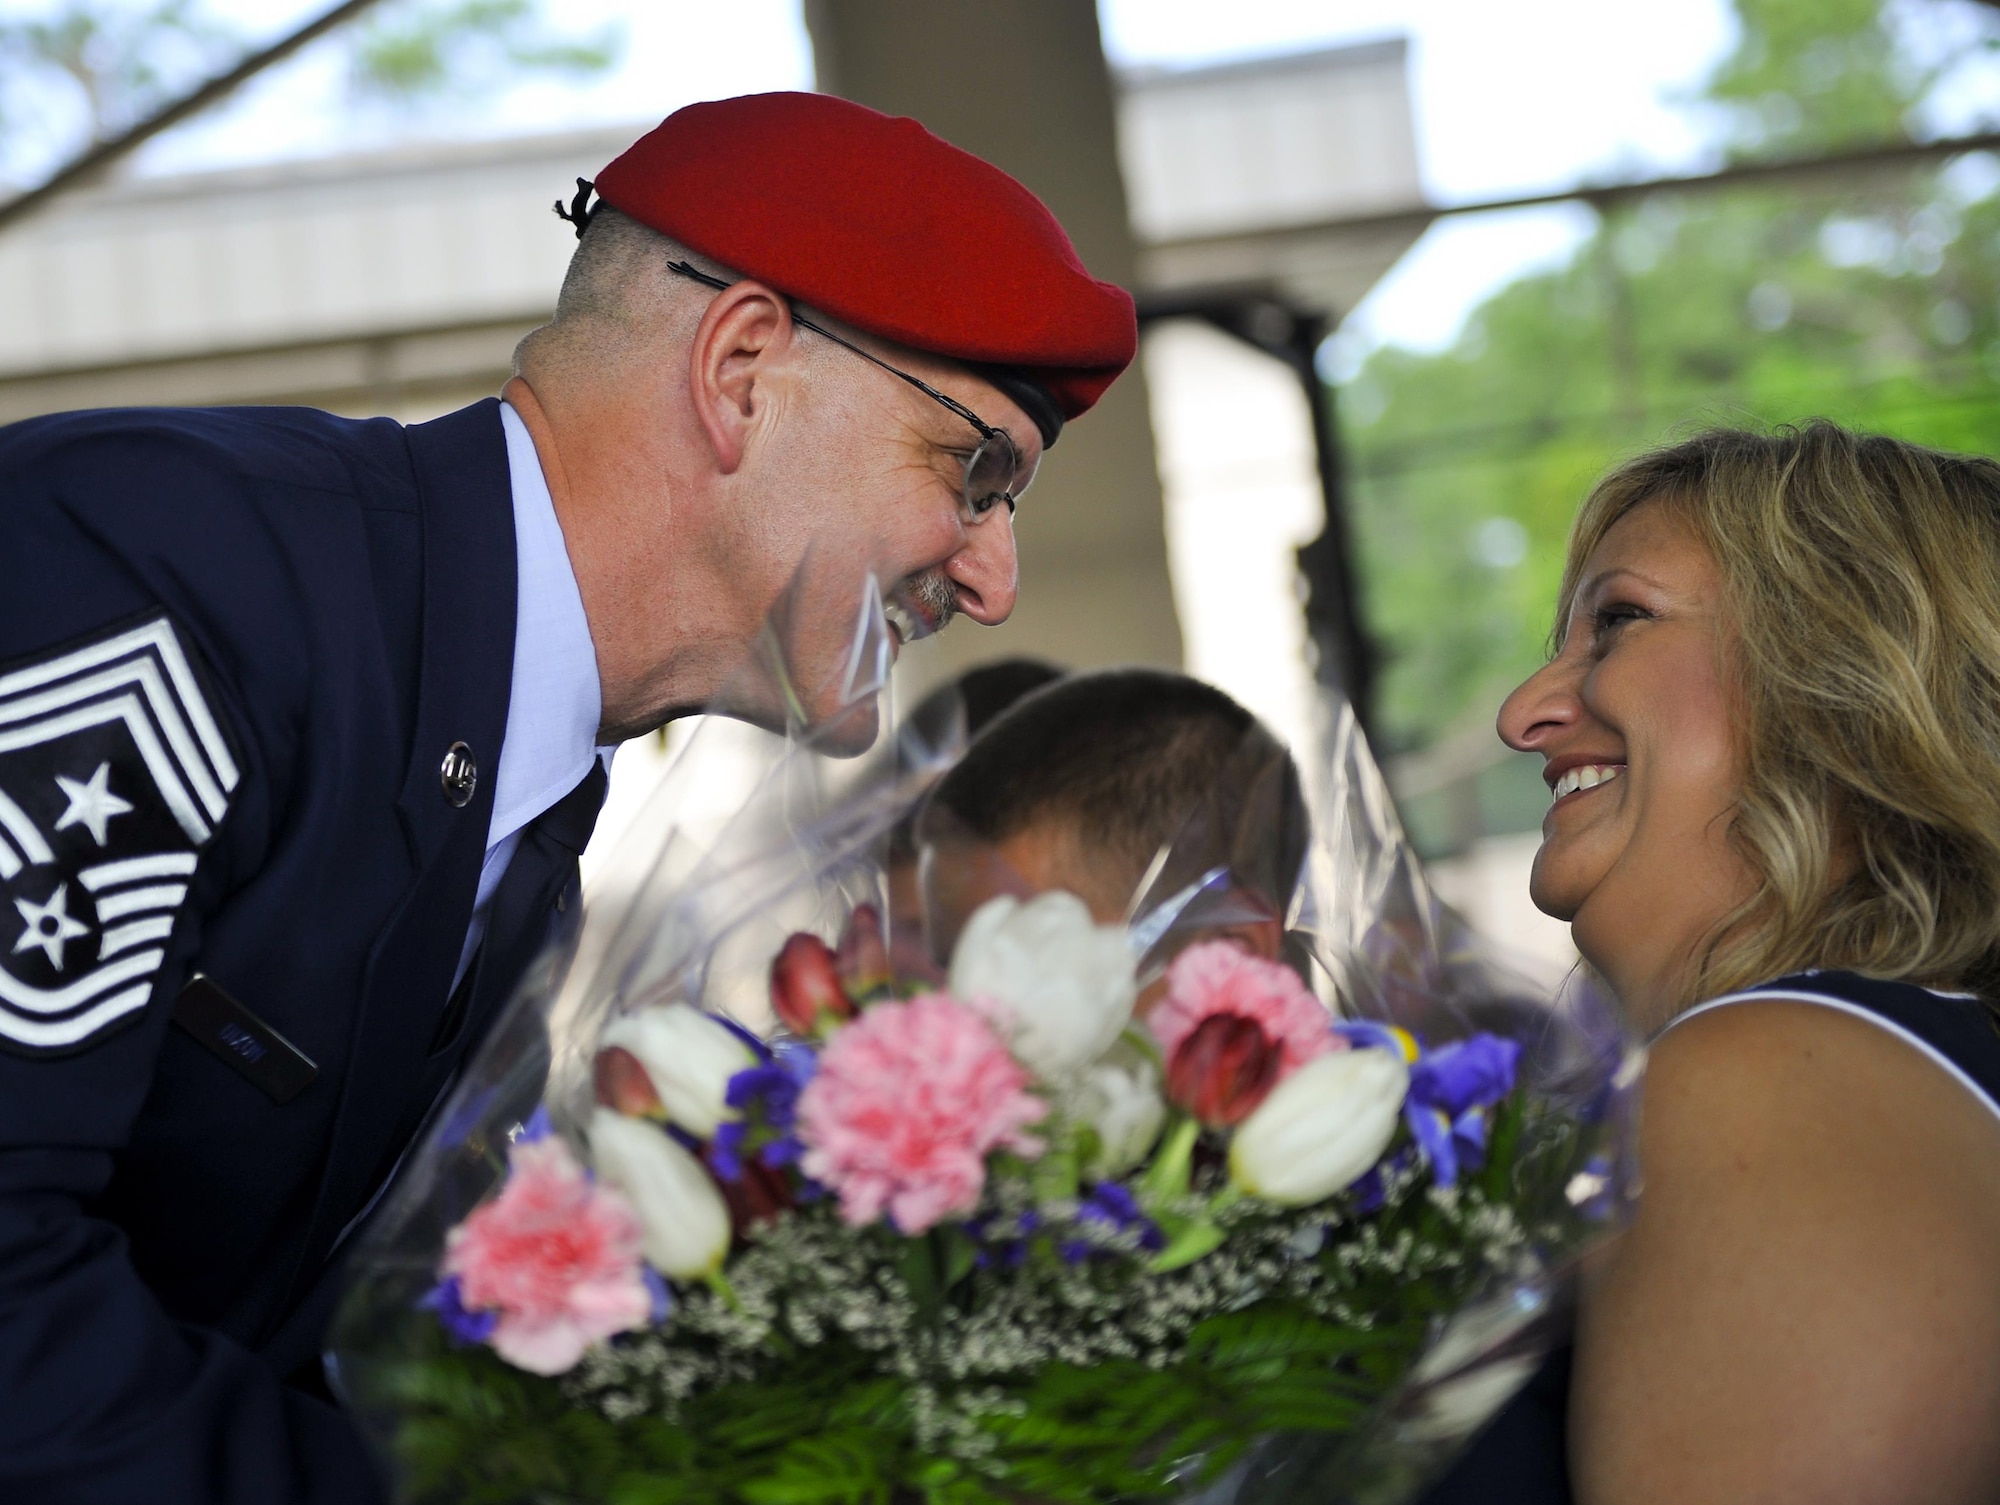 Chief Master Sgt. Bruce W. Dixon, the command chief of the 24th Special Operations Wing, presents his wife, Lori Dixon, with flowers during his retirement ceremony at Hurlburt Field, Fla., May 13, 2016. Dixon served 30 years as a combat controller, earning the title of master parachutist with more than 400 military jumps including three combat jumps in Afghanistan. In total, he spent ten of those thirty years away from his family, consistently serving his nation's call in dangerous ground combat and training. (U.S. Air Force photo by Airman 1st Class Kai White) 